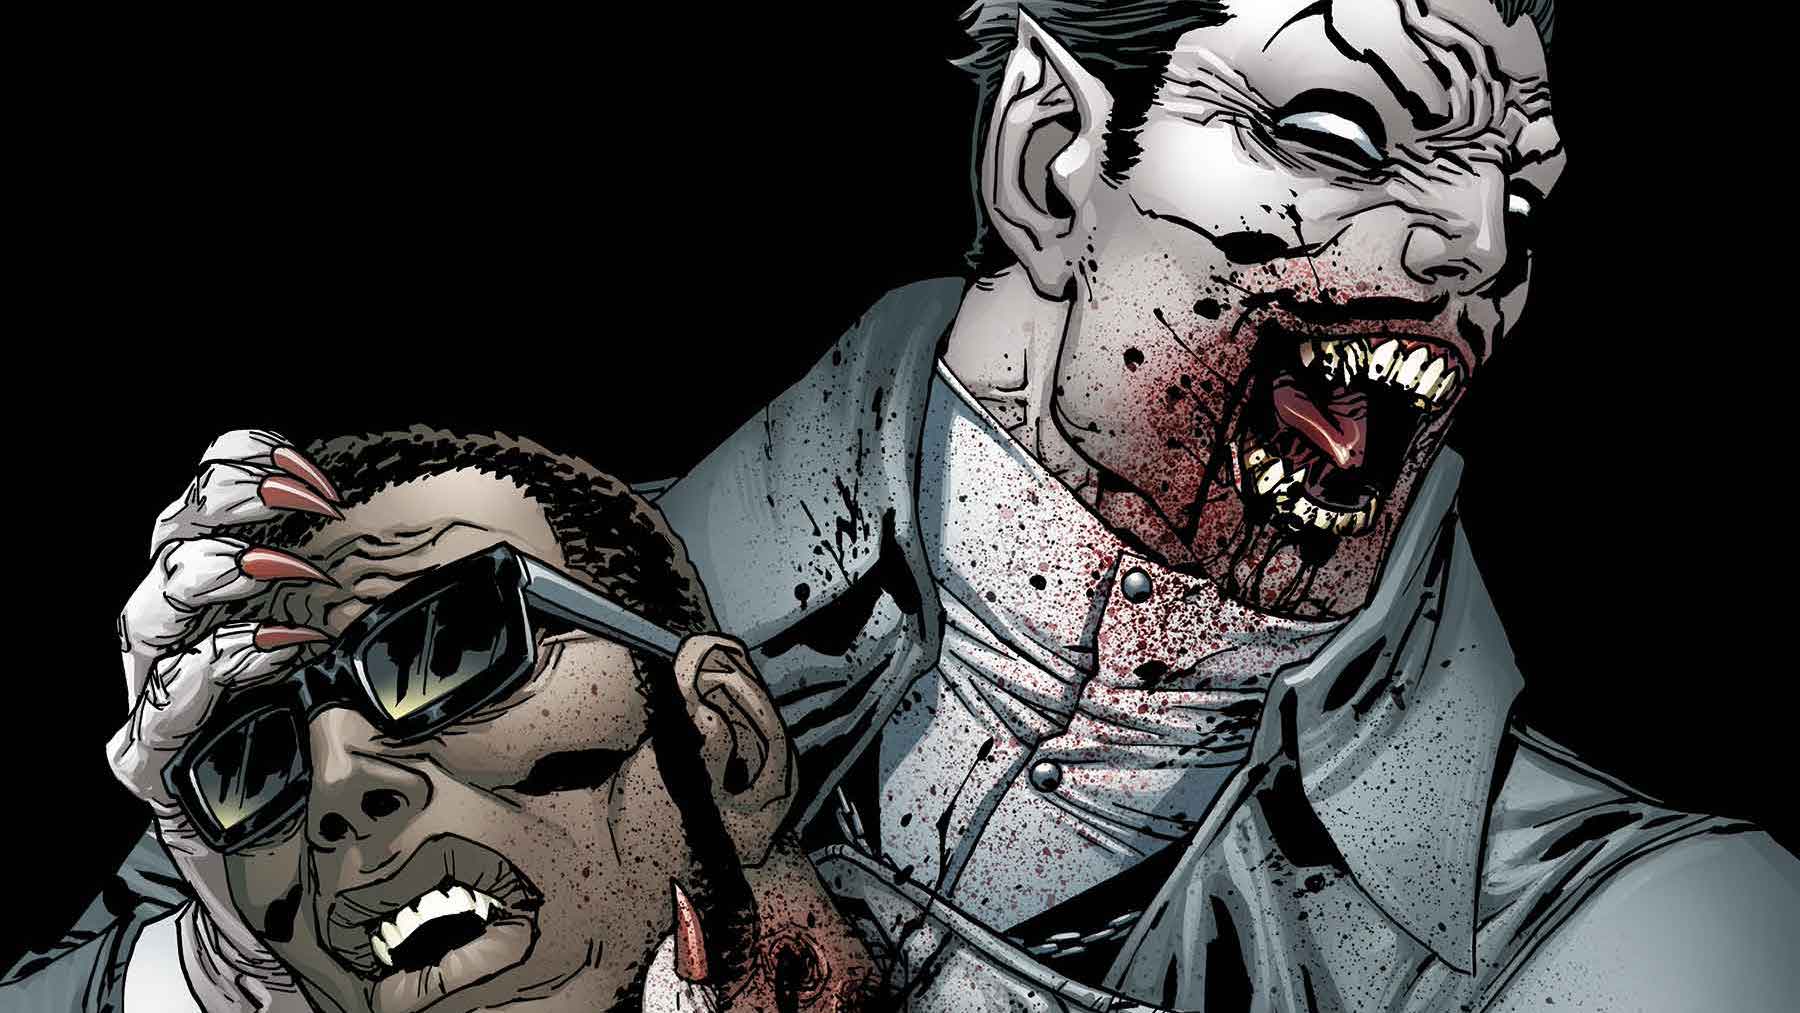 Marv Wolfman returns to 'Tomb of Dracula' with 'What If...? Dark: Tomb of Dracula' #1